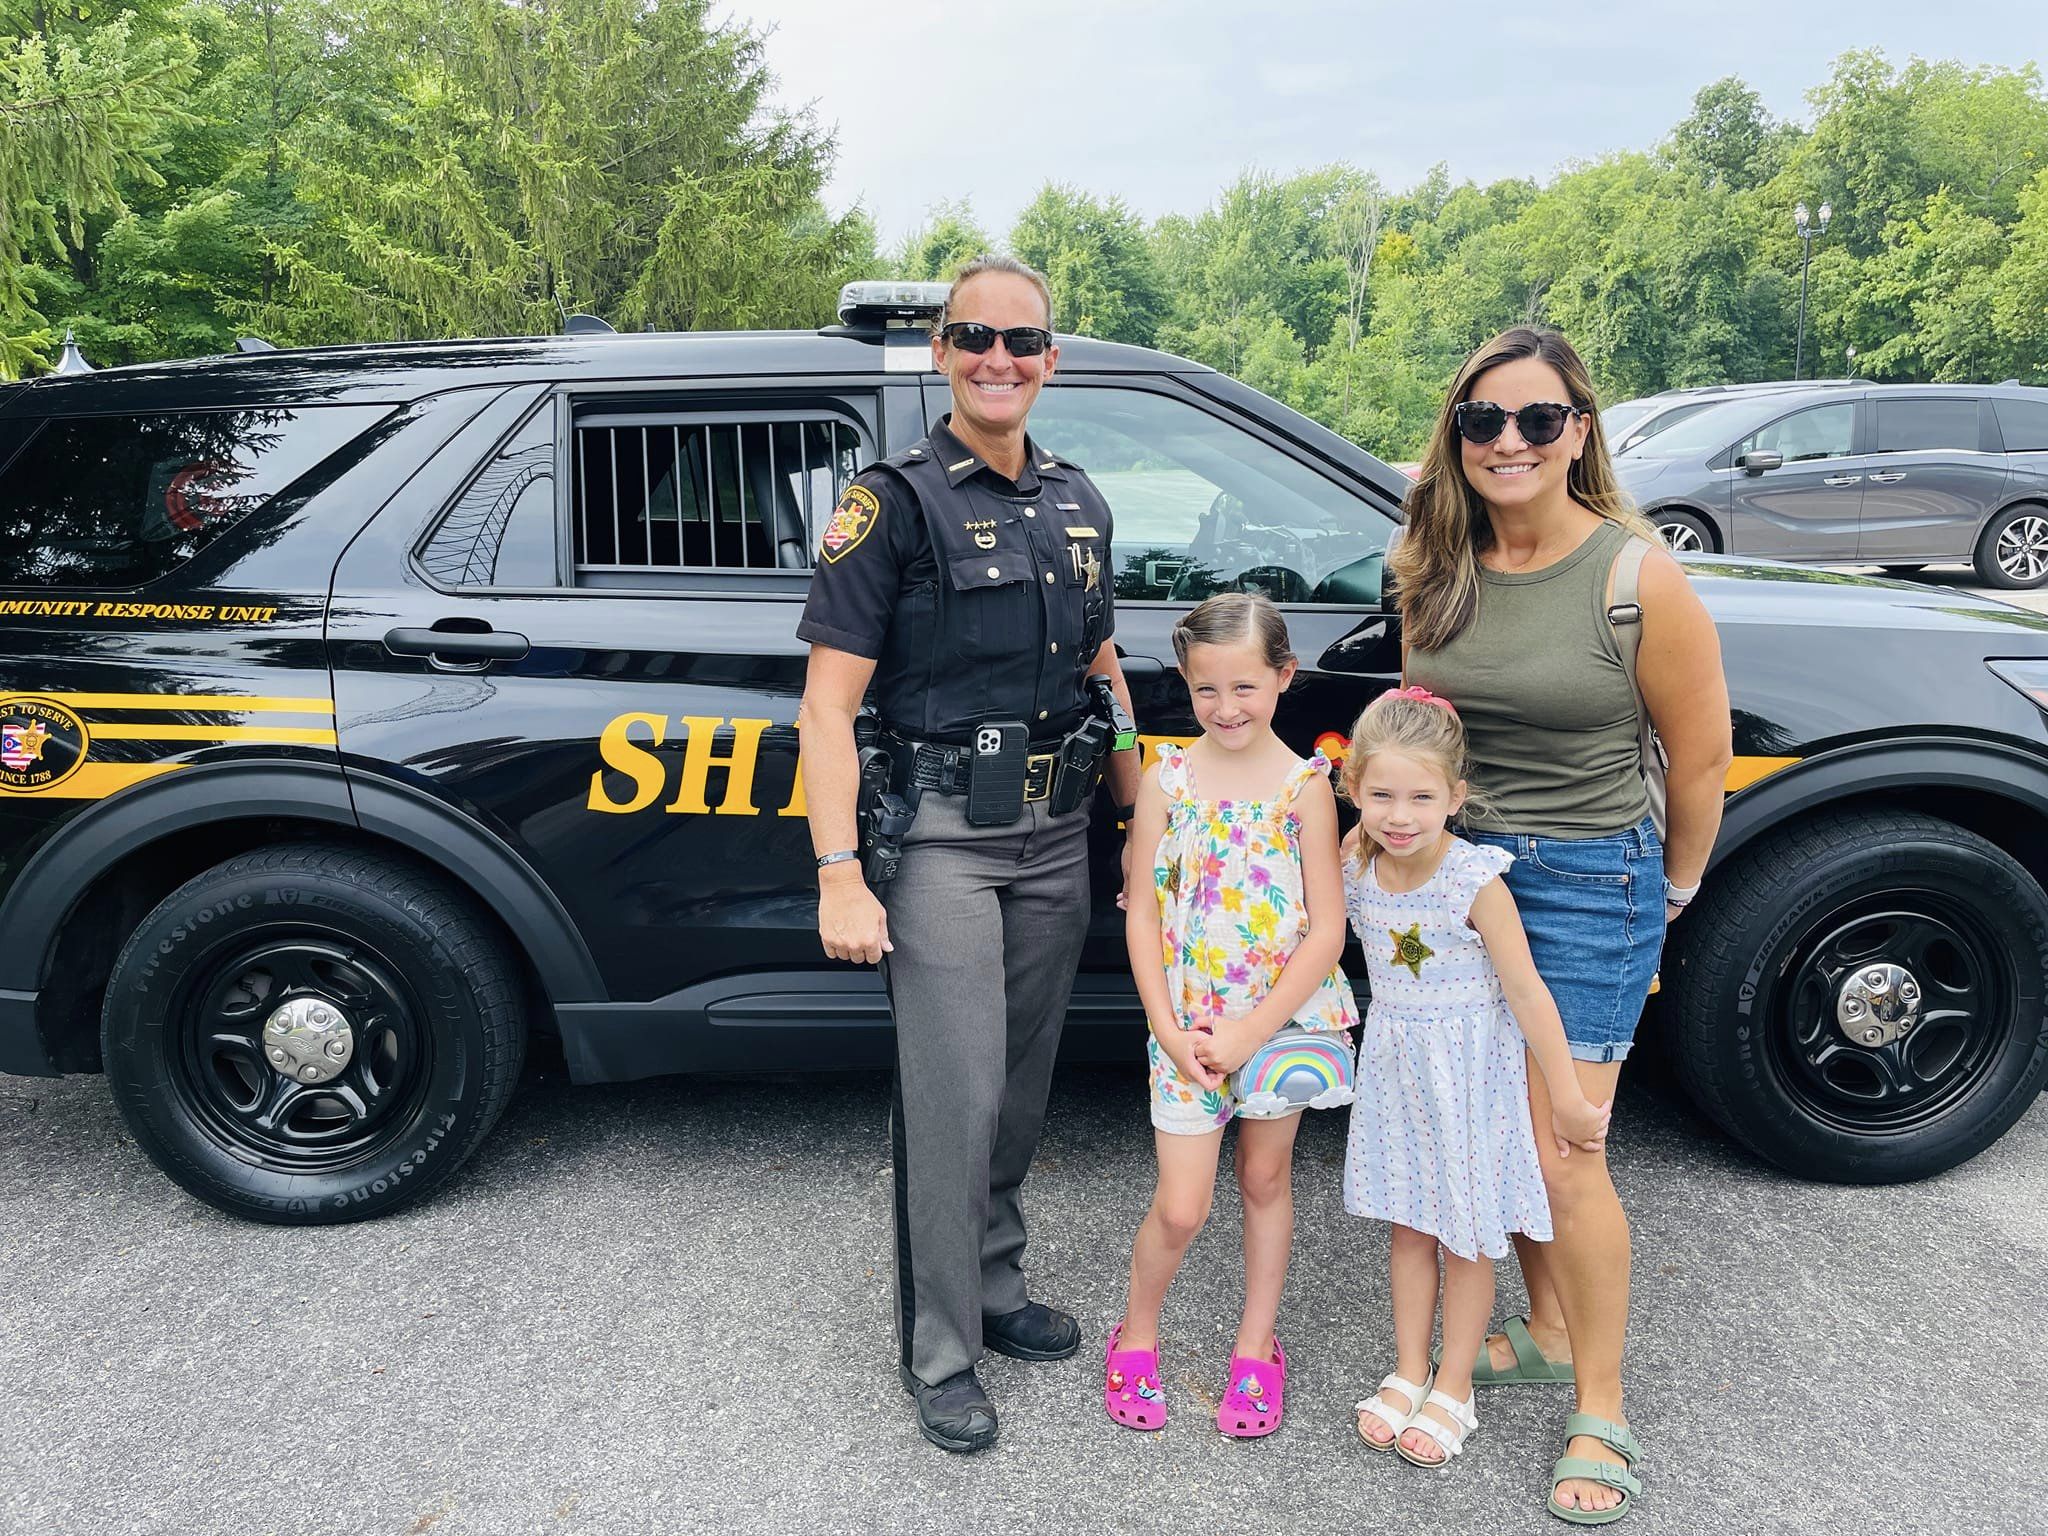 Deputy Hedrick with a family